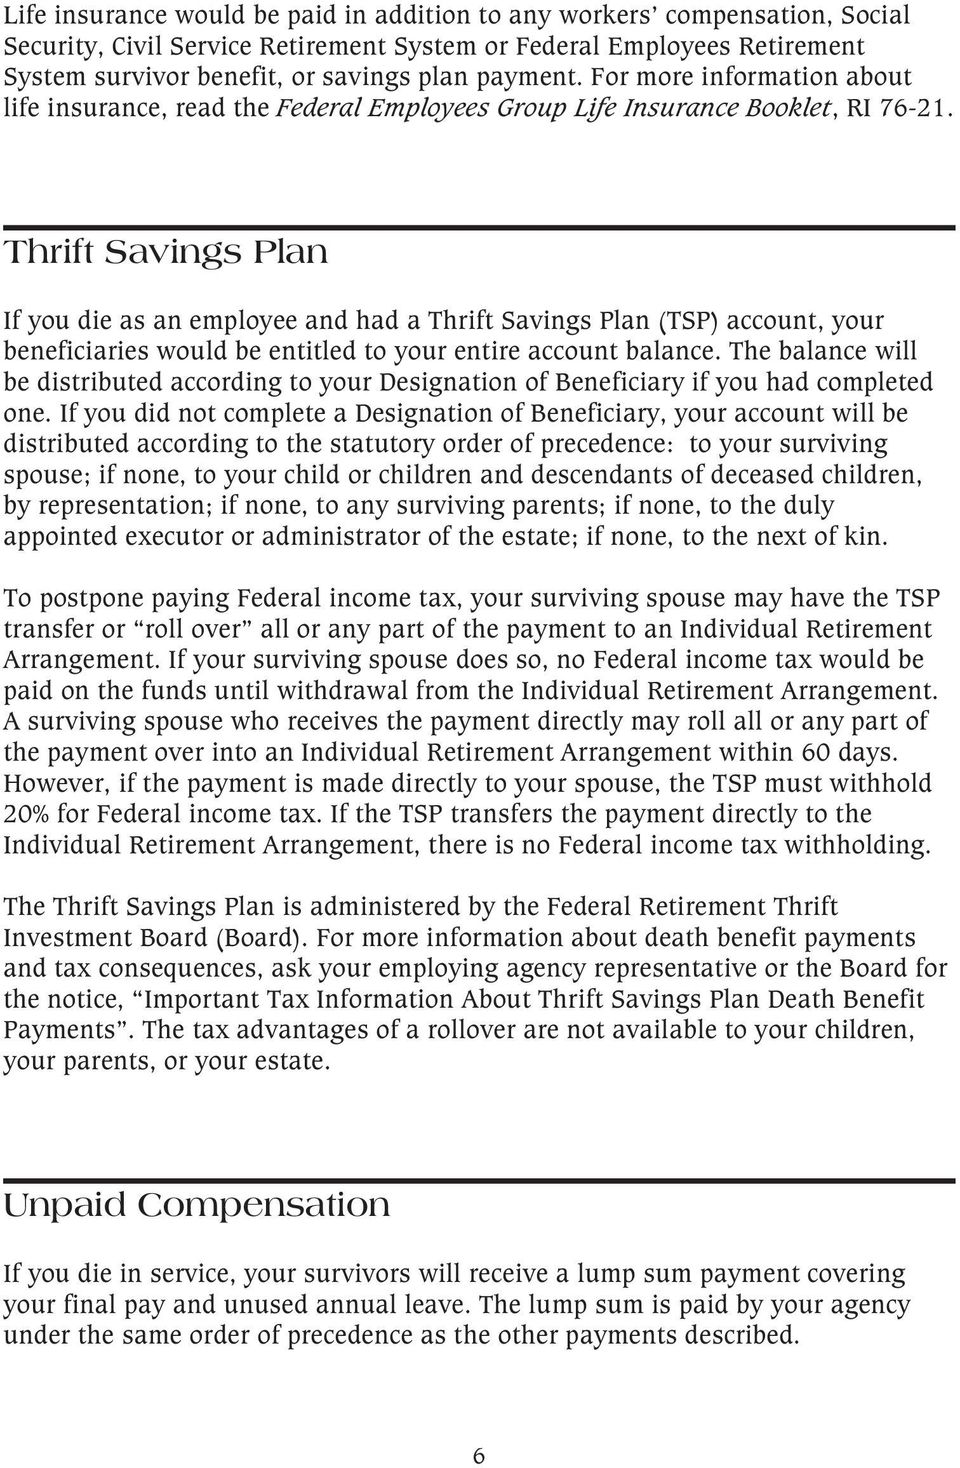 Thrift Savings Plan If you die as an employee and had a Thrift Savings Plan (TSP) account, your beneficiaries would be entitled to your entire account balance.